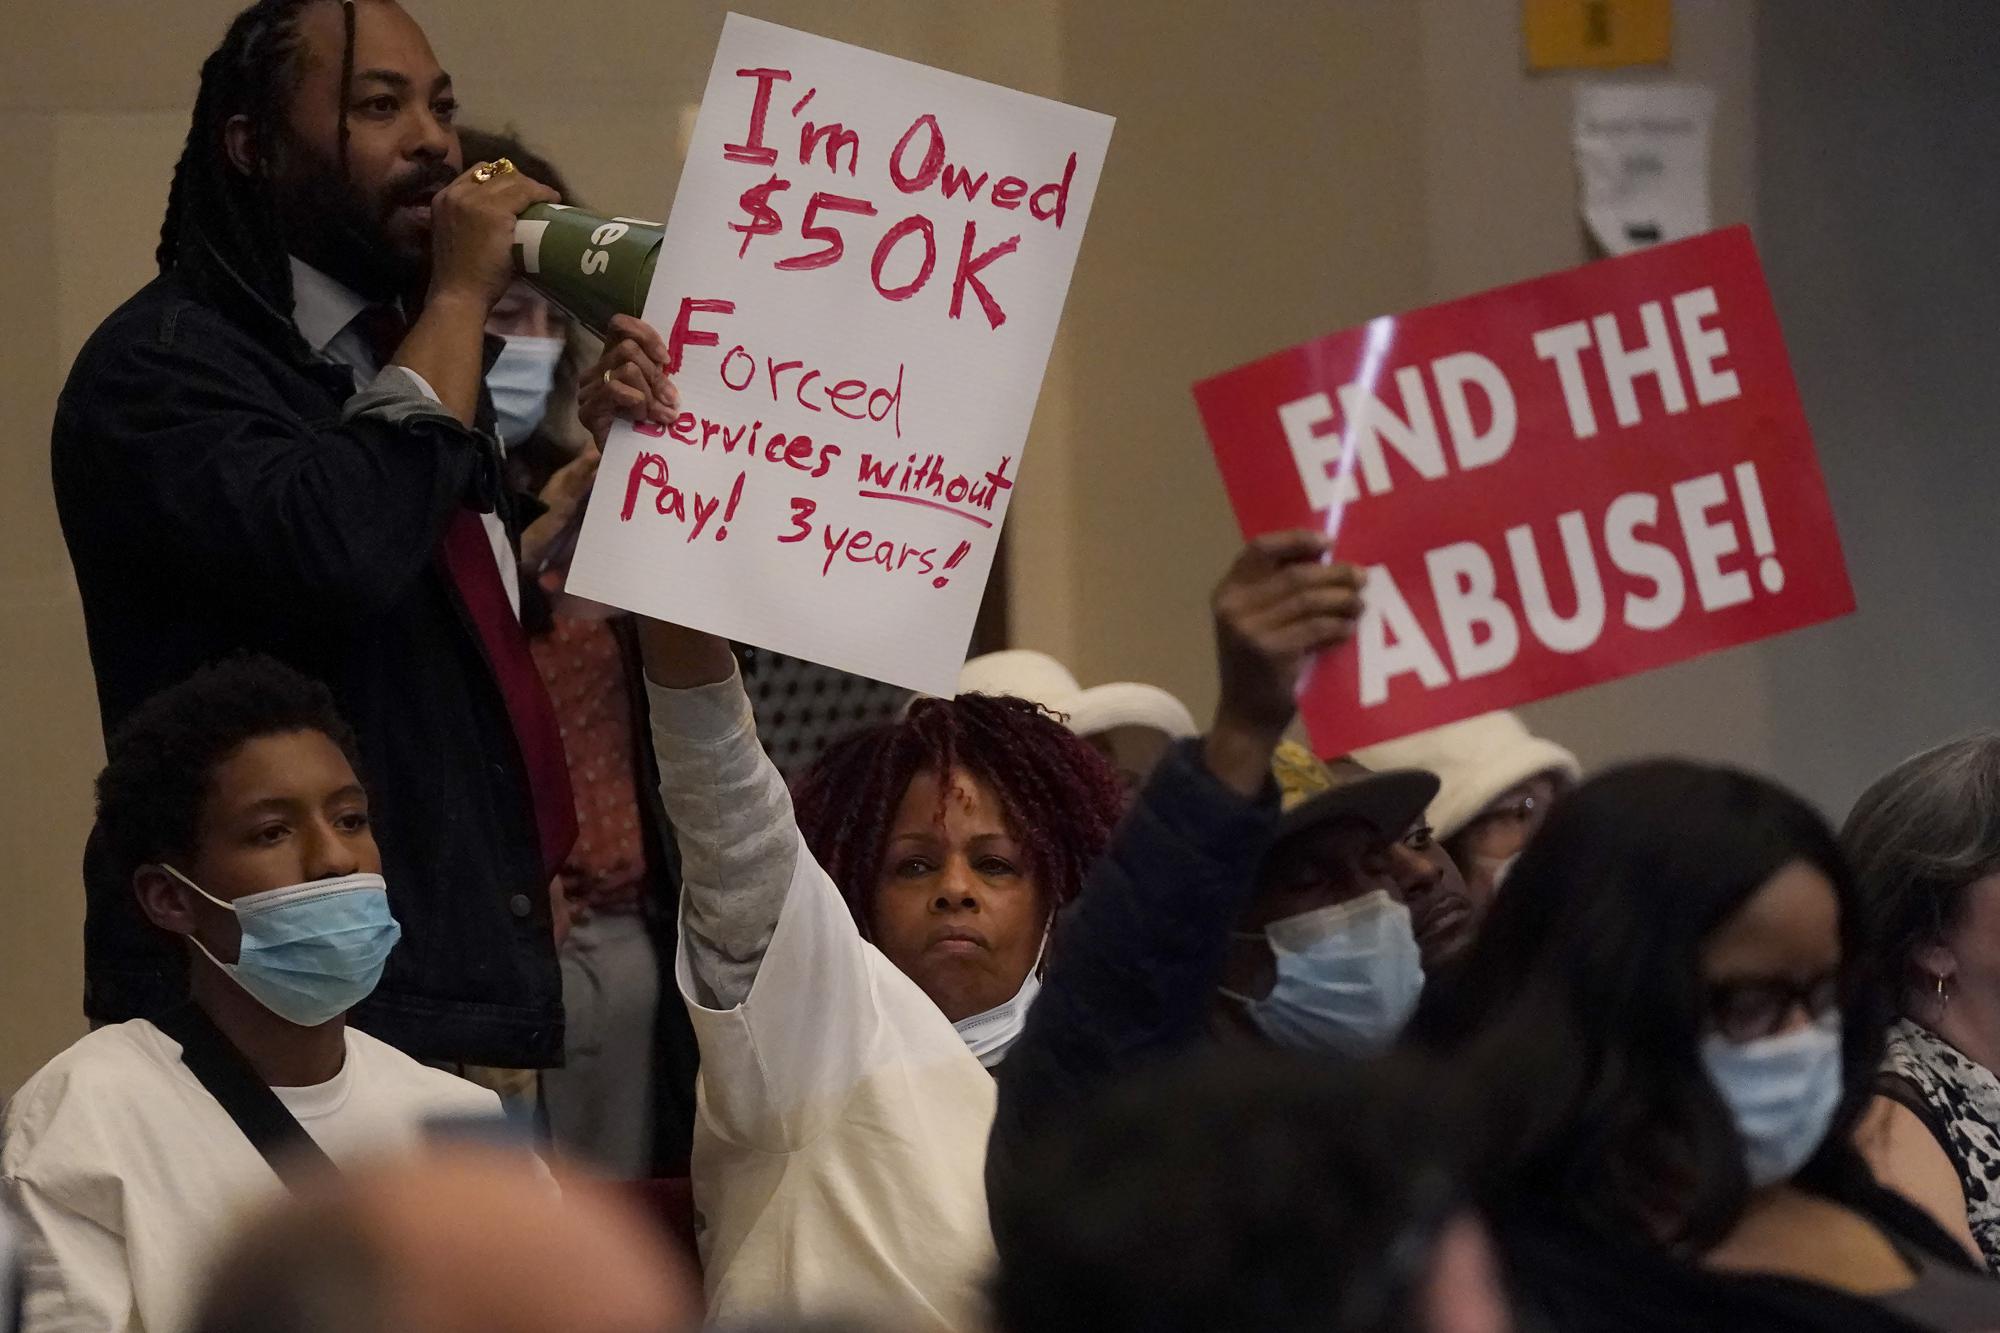 Seneca Scott, top left, yells as Pamela Haile, middle, holds up a sign with others during a Oakland City Council special community and economic development committee at City Hall in Oakland, Calif., Tuesday, April 11, 2023. Some landlords have gone without rental income for more than three years after Oakland, California approved an eviction moratorium in March 2020. (AP Photo/Jeff Chiu)